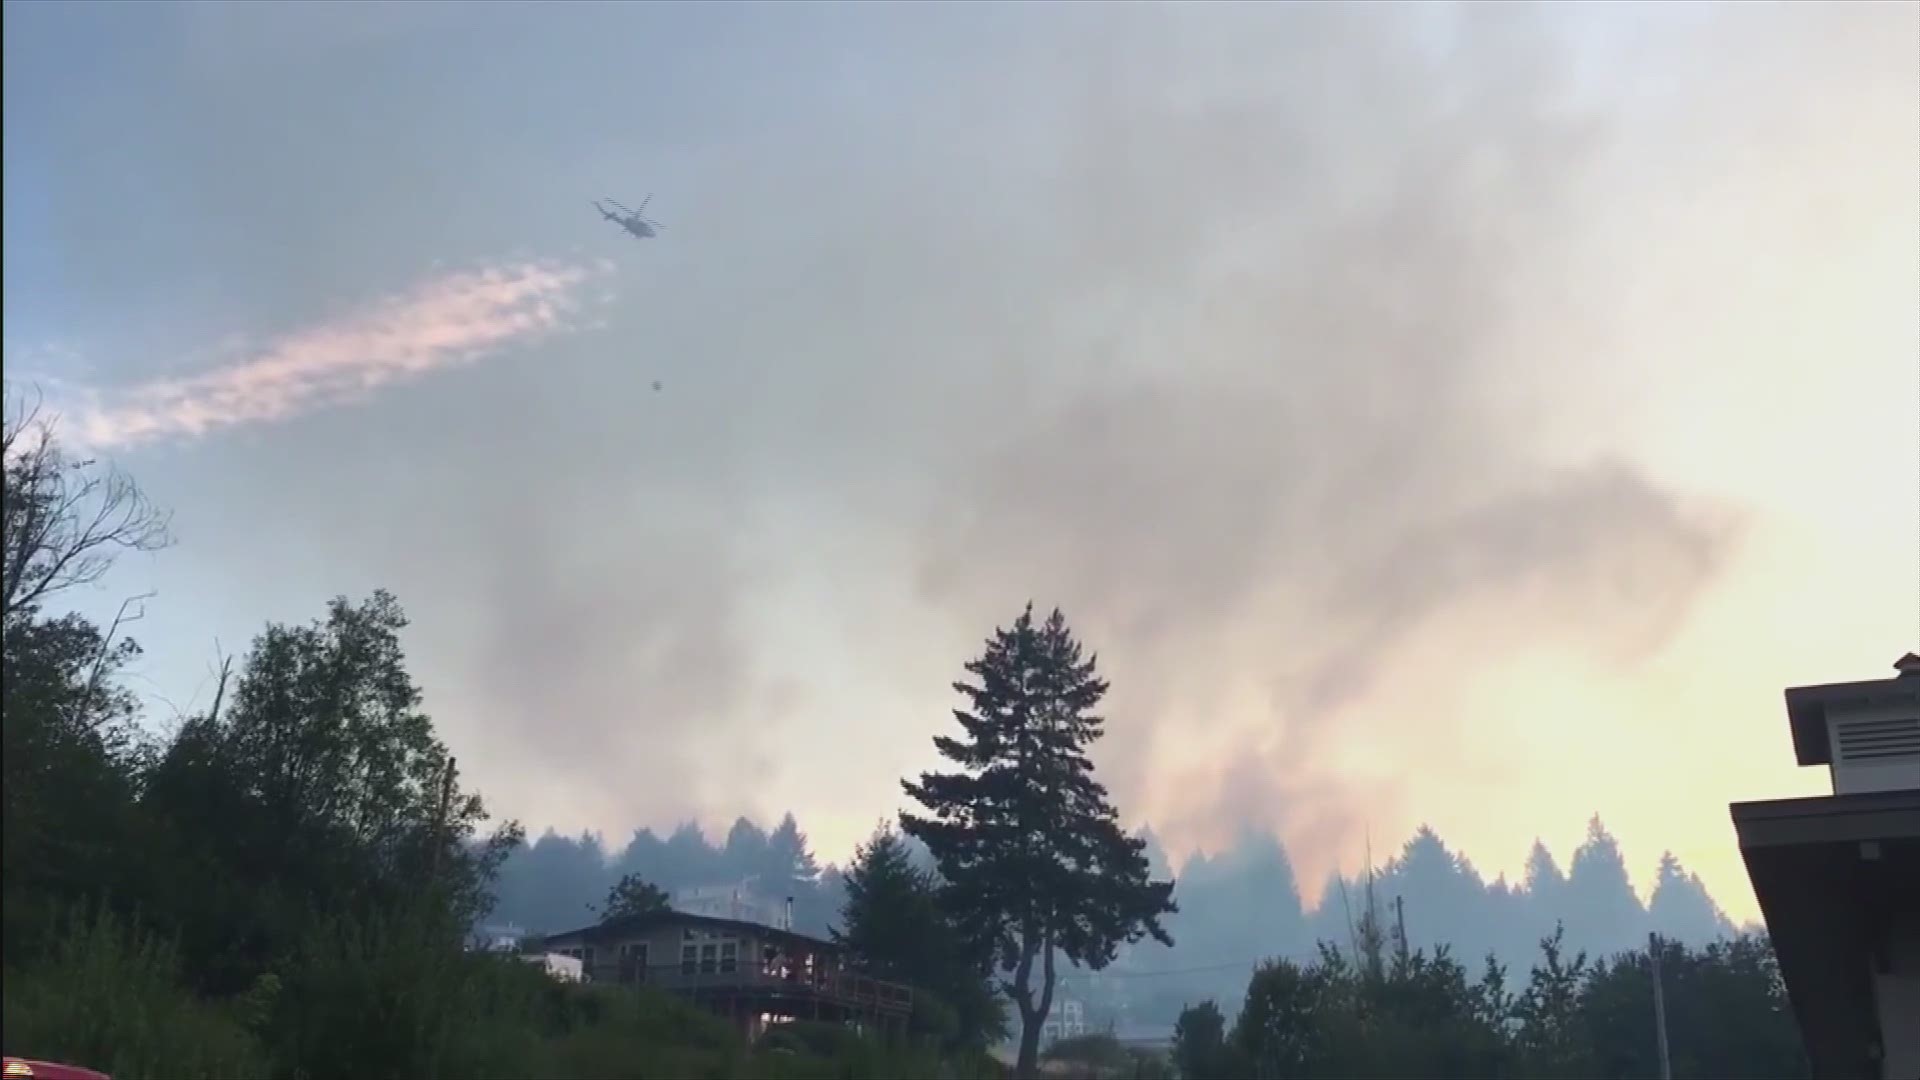 A Department of Natural Resources helicopter dropped water on a brush fire in Mason County Thursday evening. The fire caused Level 3 evacuations for some residents.